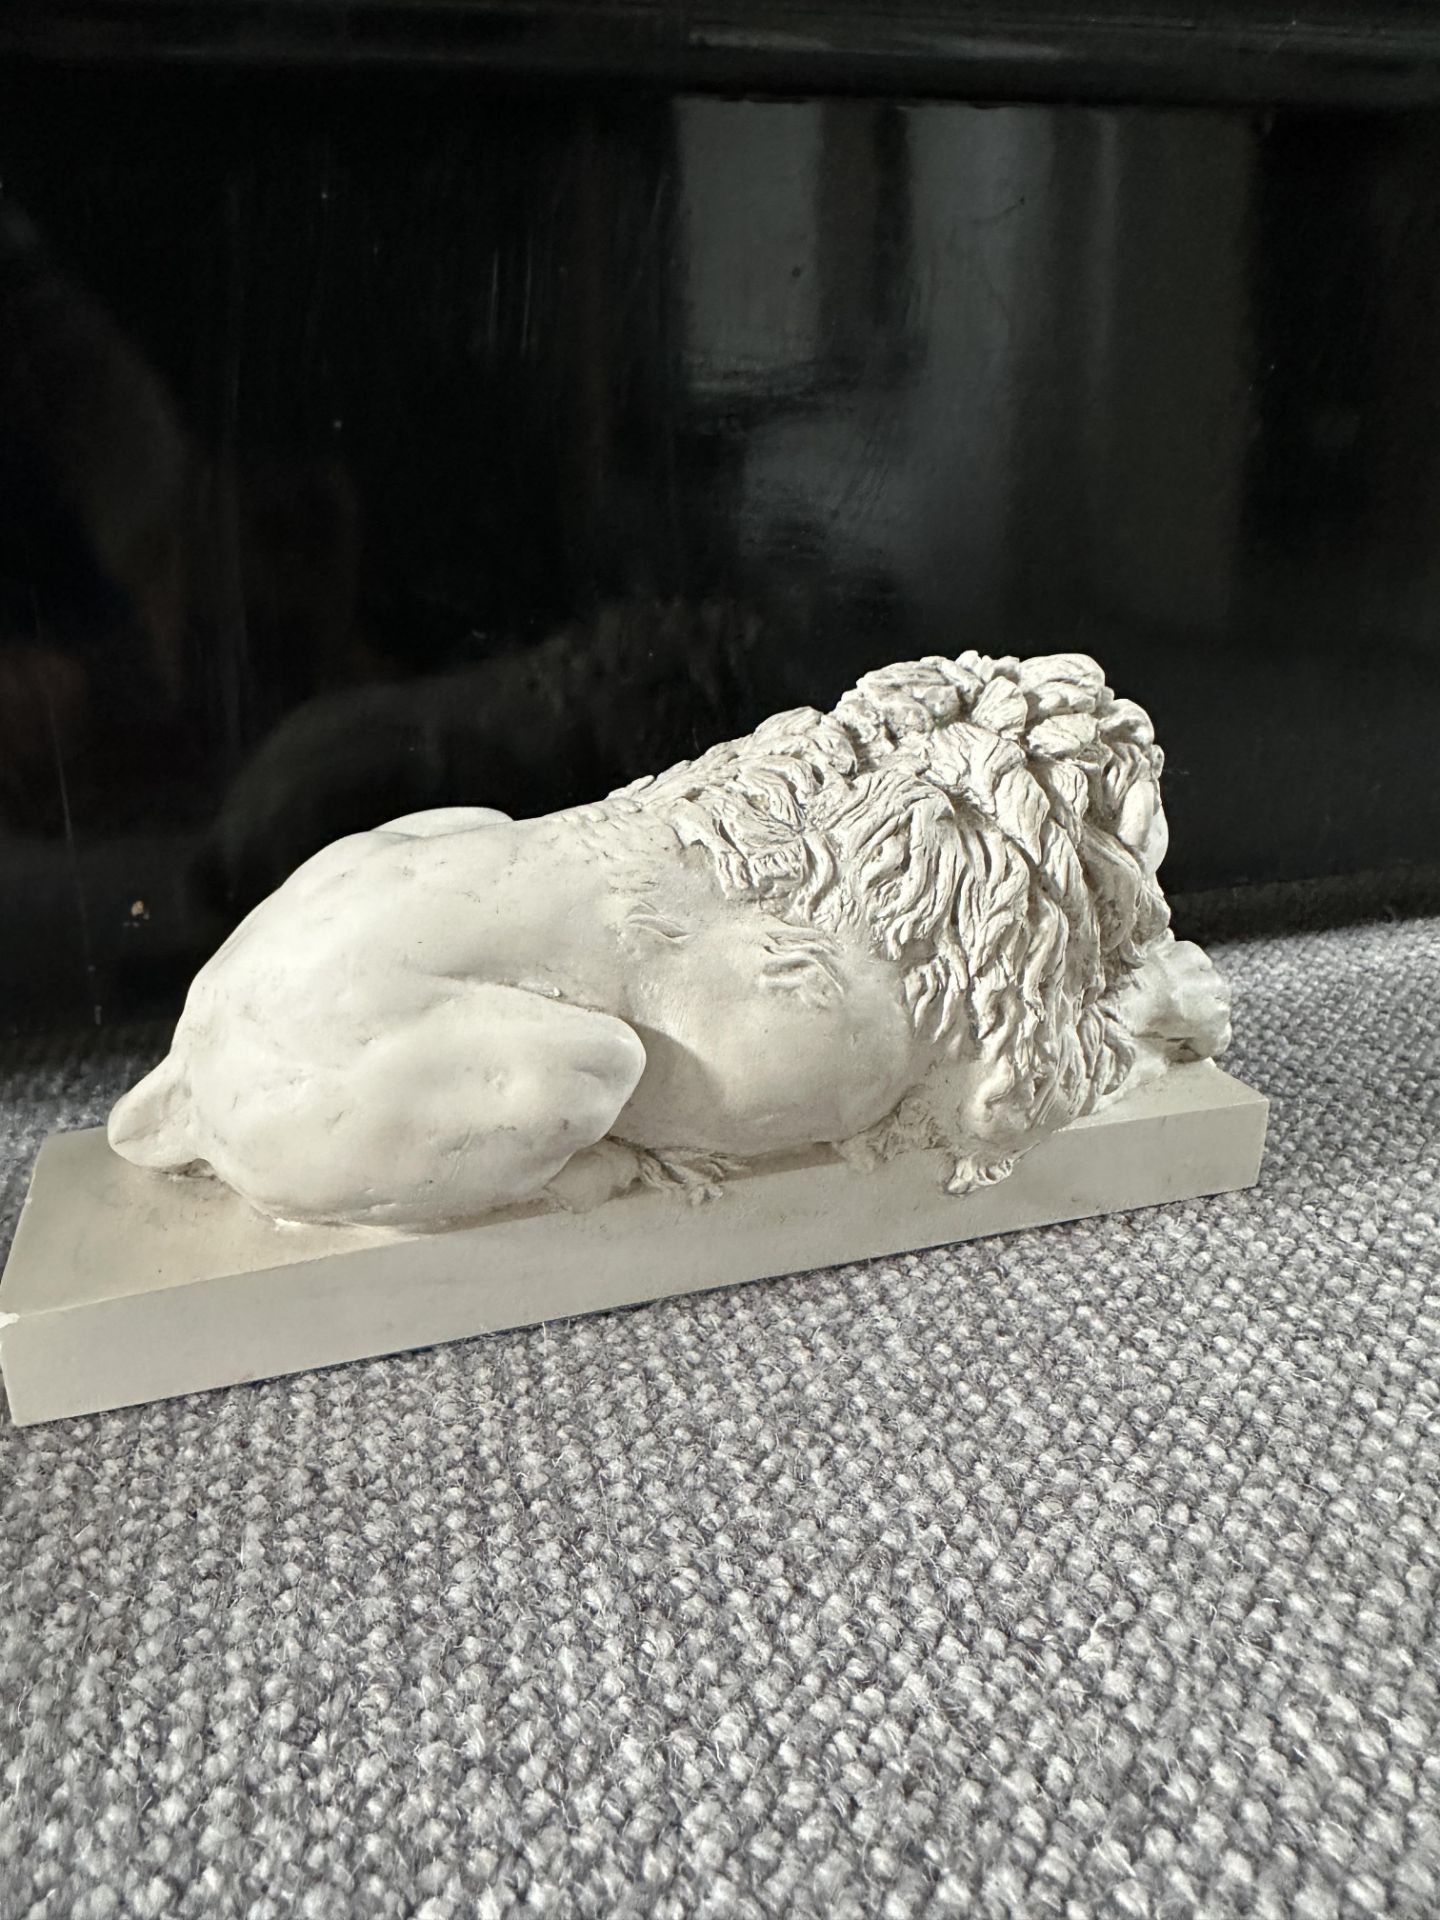 2 x White Ceramic Sleeping Lion Book Ends From The CHATSWORTH Collection With Inscription - Image 3 of 3